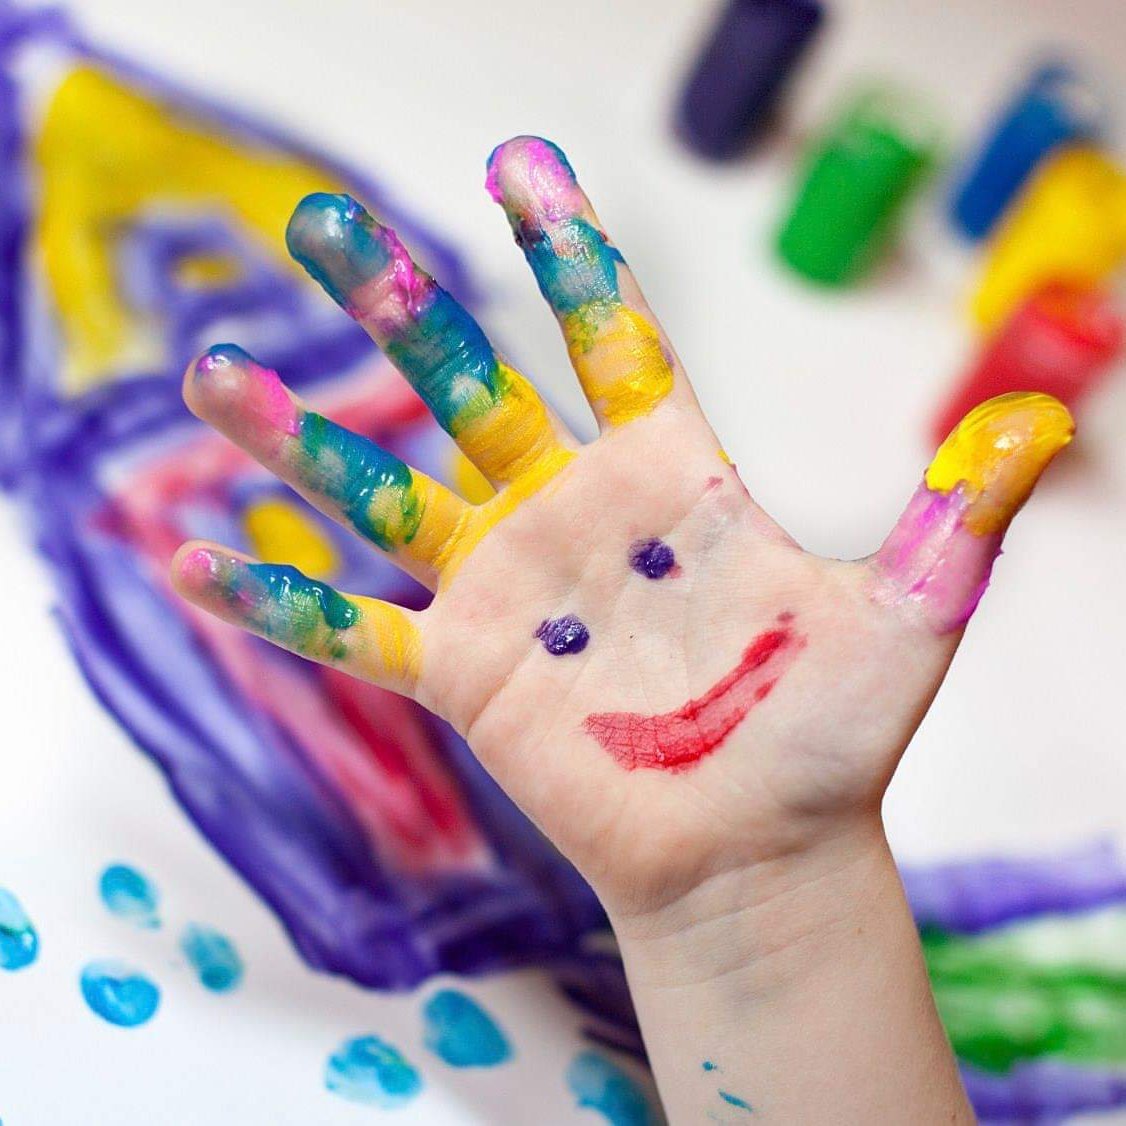 Helping children resolve their problems through therapeutic play.